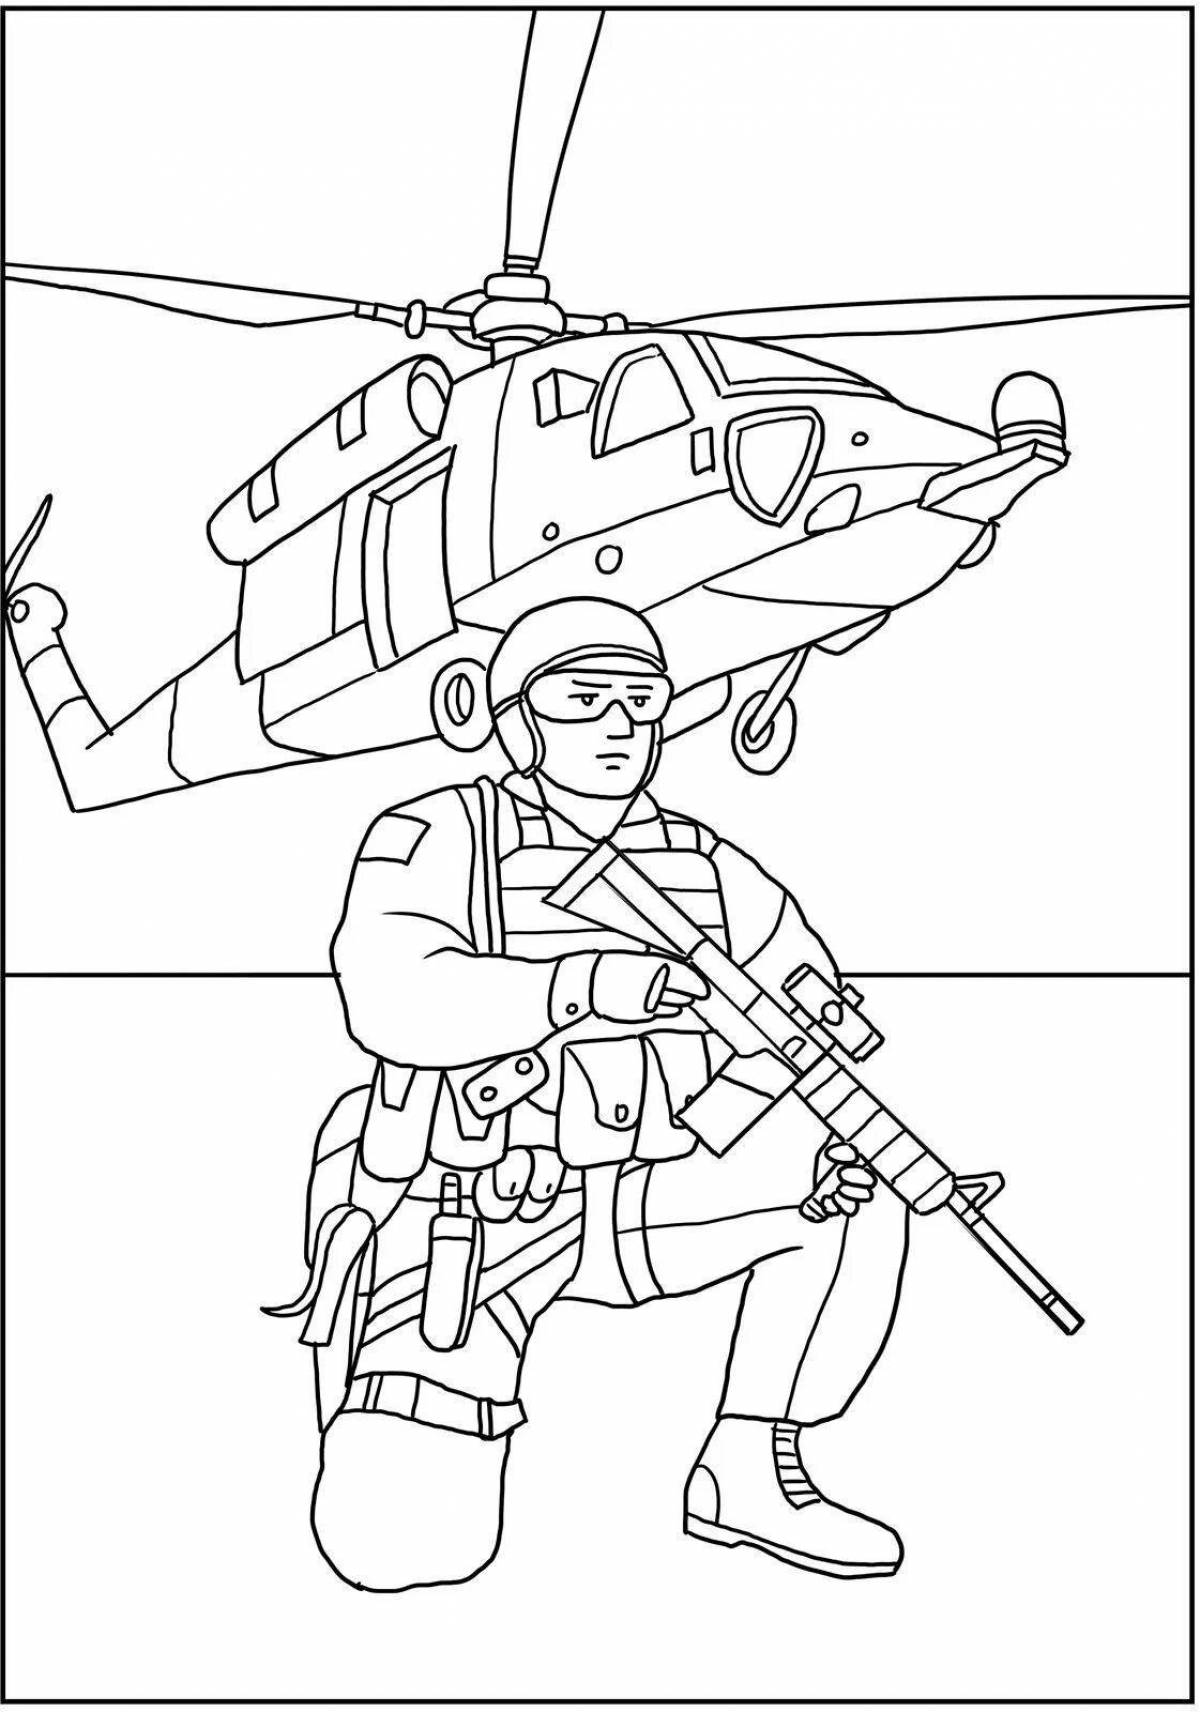 A fascinating coloring book about the military profession for preschoolers